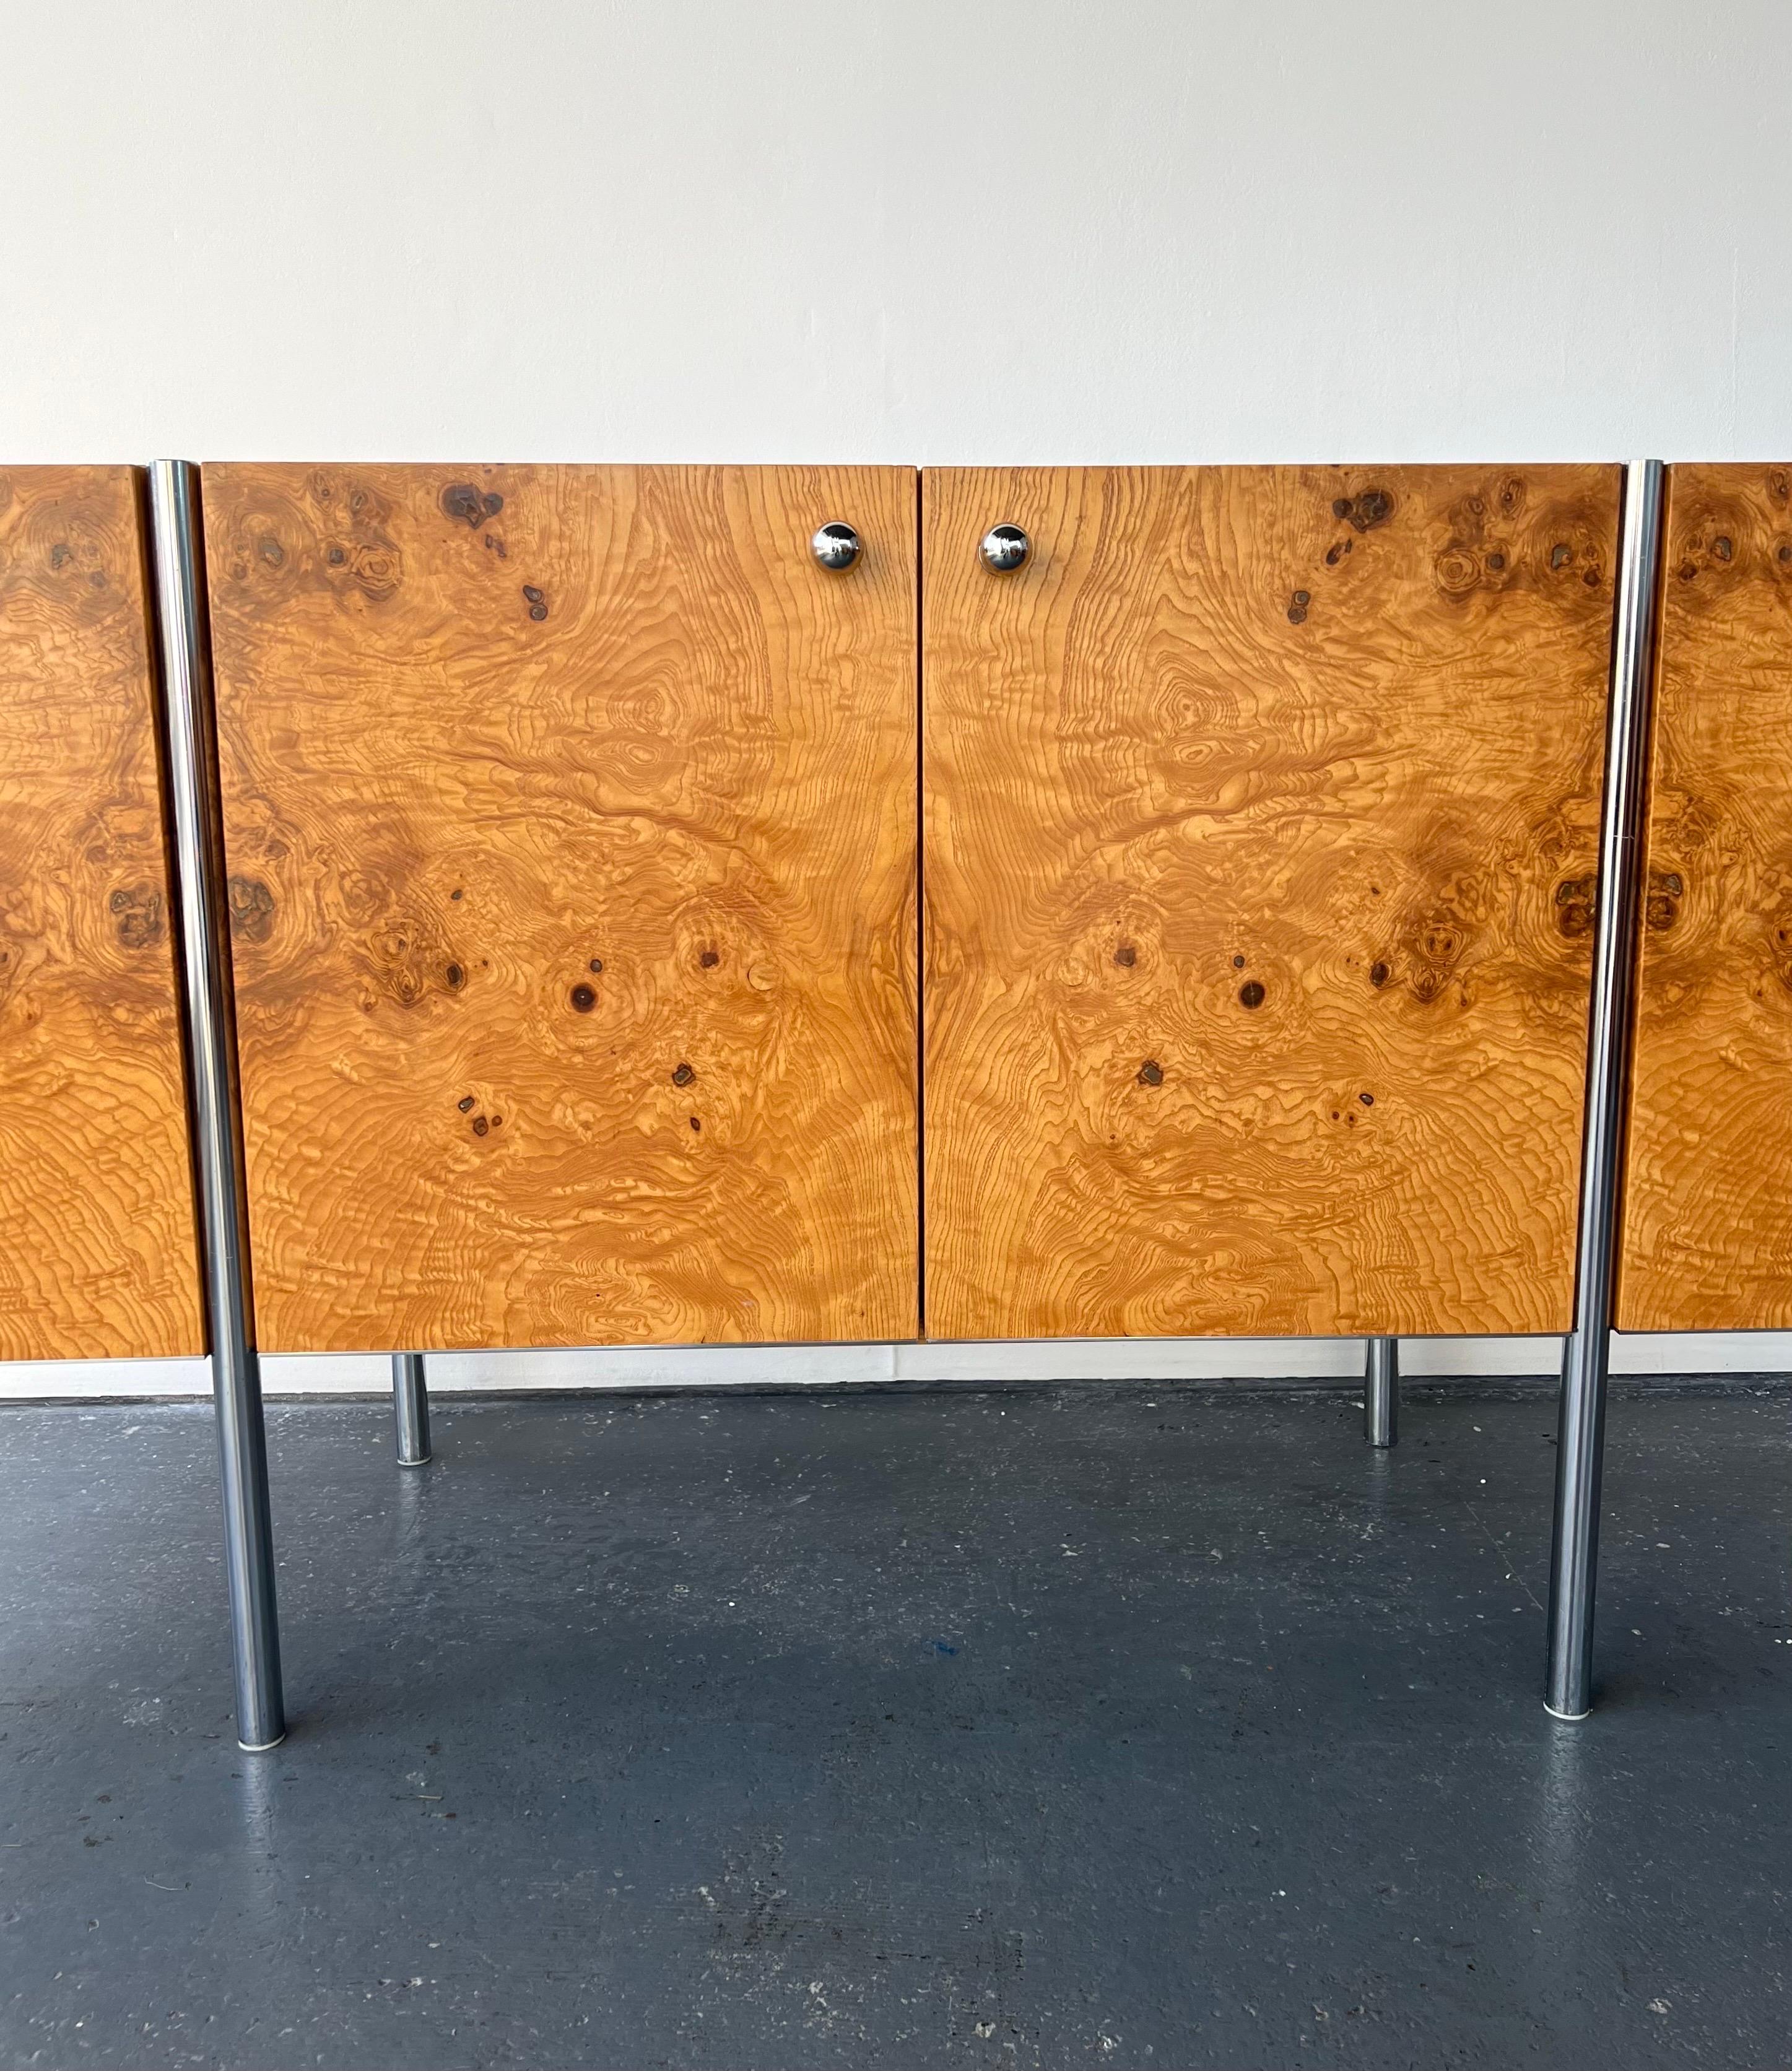 A Walnut and Chrome midcentury Sideboard custom made. This fabulous vintage sideboard is superb quality and has lovely chrome handles and legs which are in very good condition. There is no maker label and there is no match online therefore we